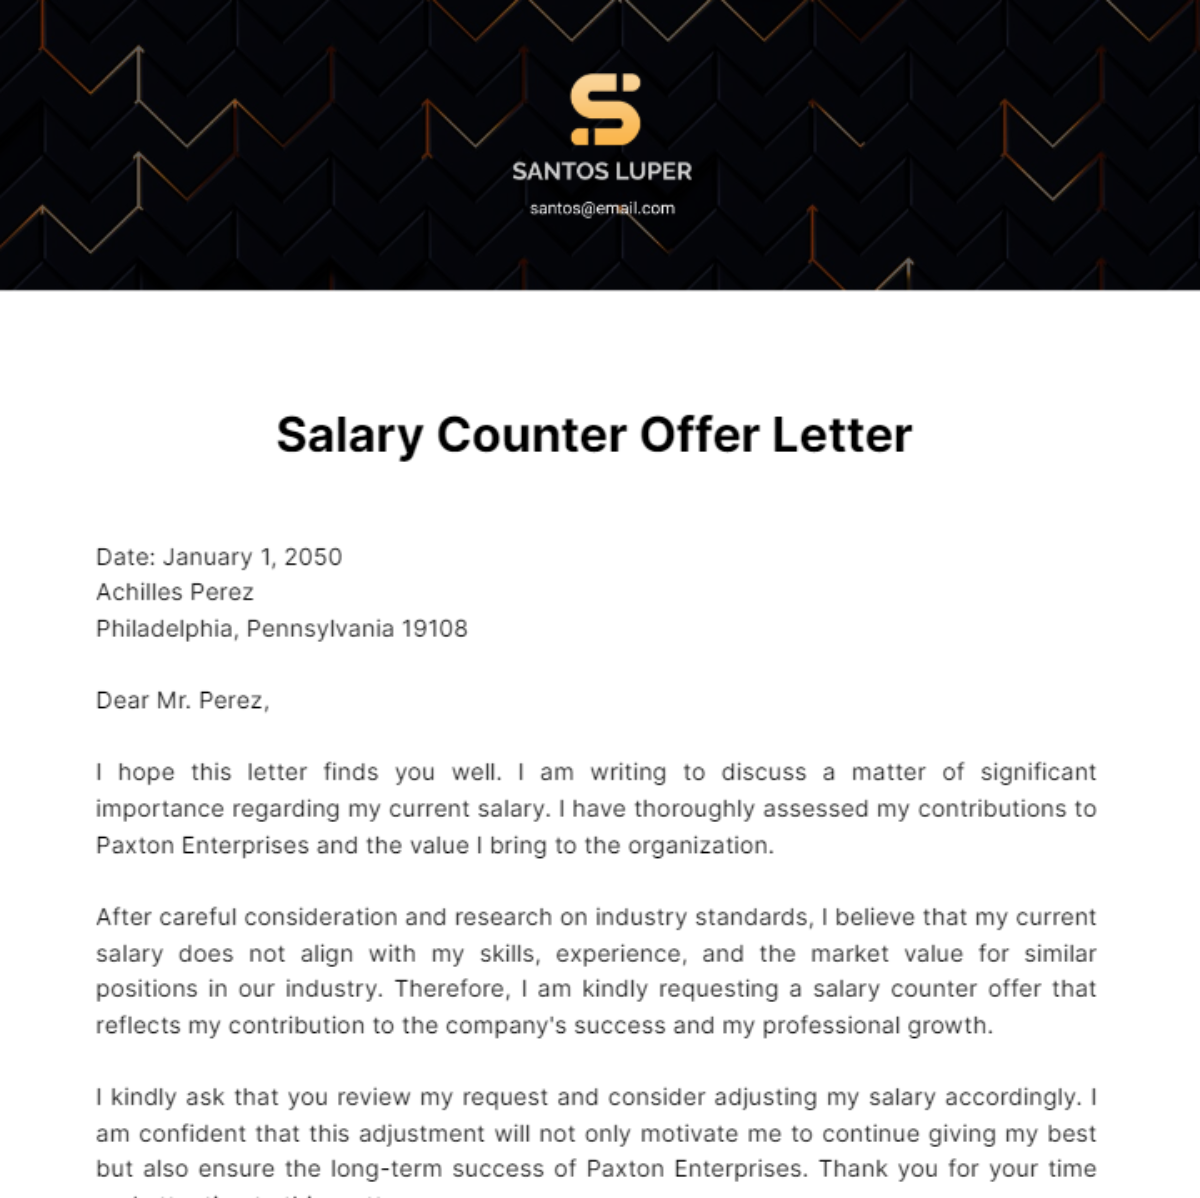 Salary Counter Offer Letter Template